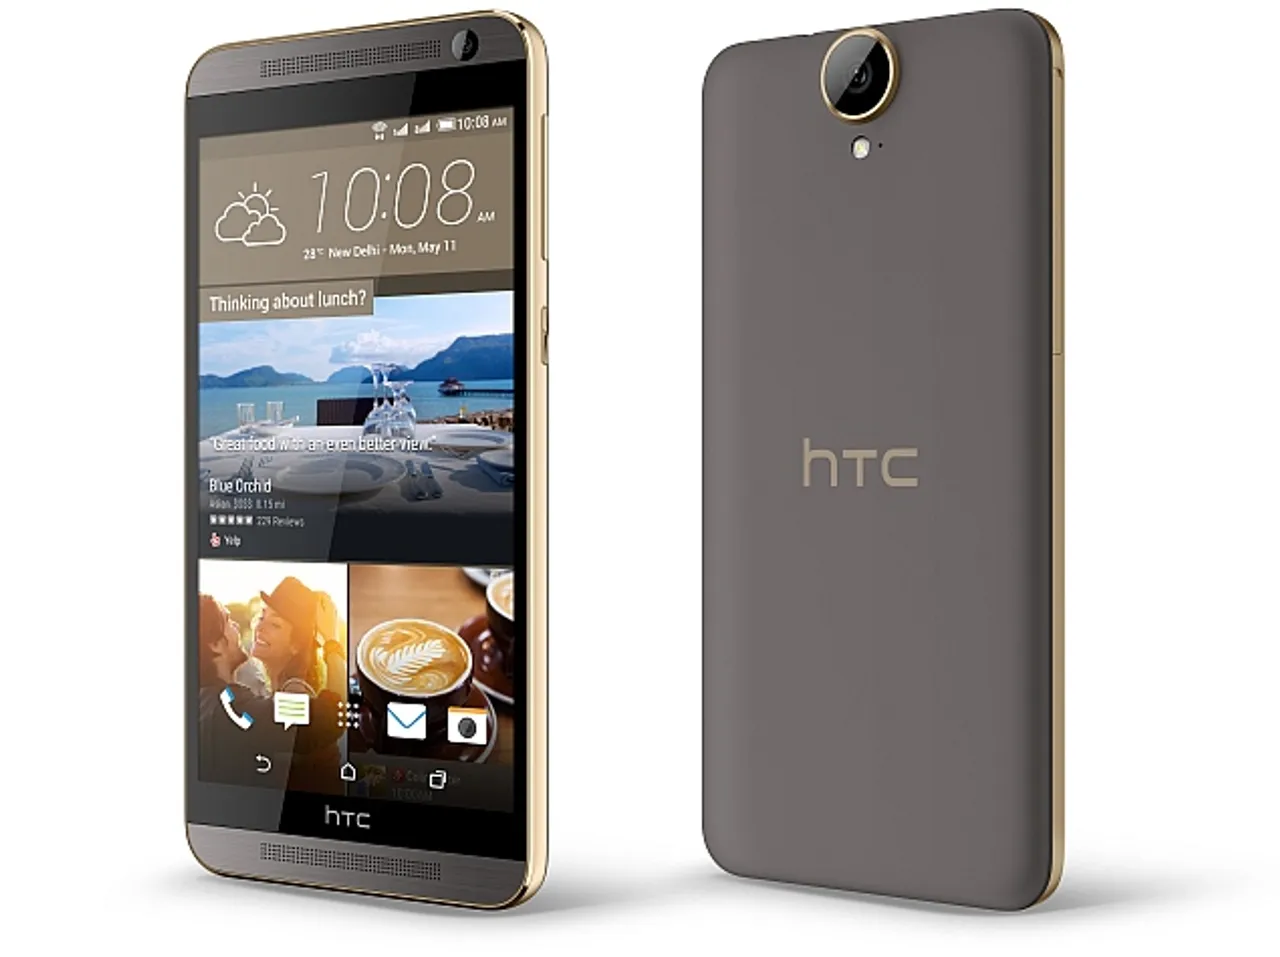 HTC One E9+ with Dual SIM and 5.5" QHD display launched at Rs. 36,790